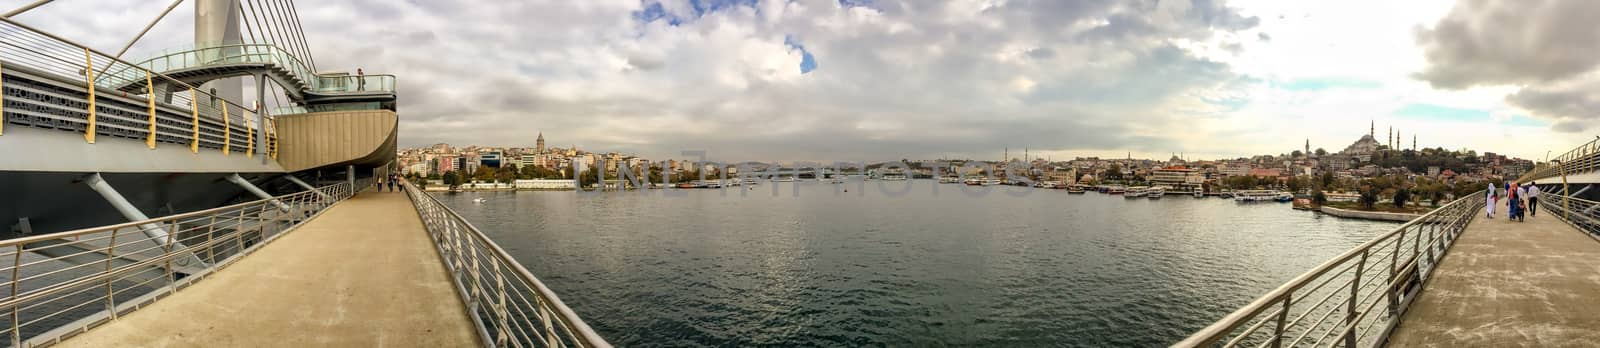 Istanbul. Panoramic view from New Galata Bridge by jovannig